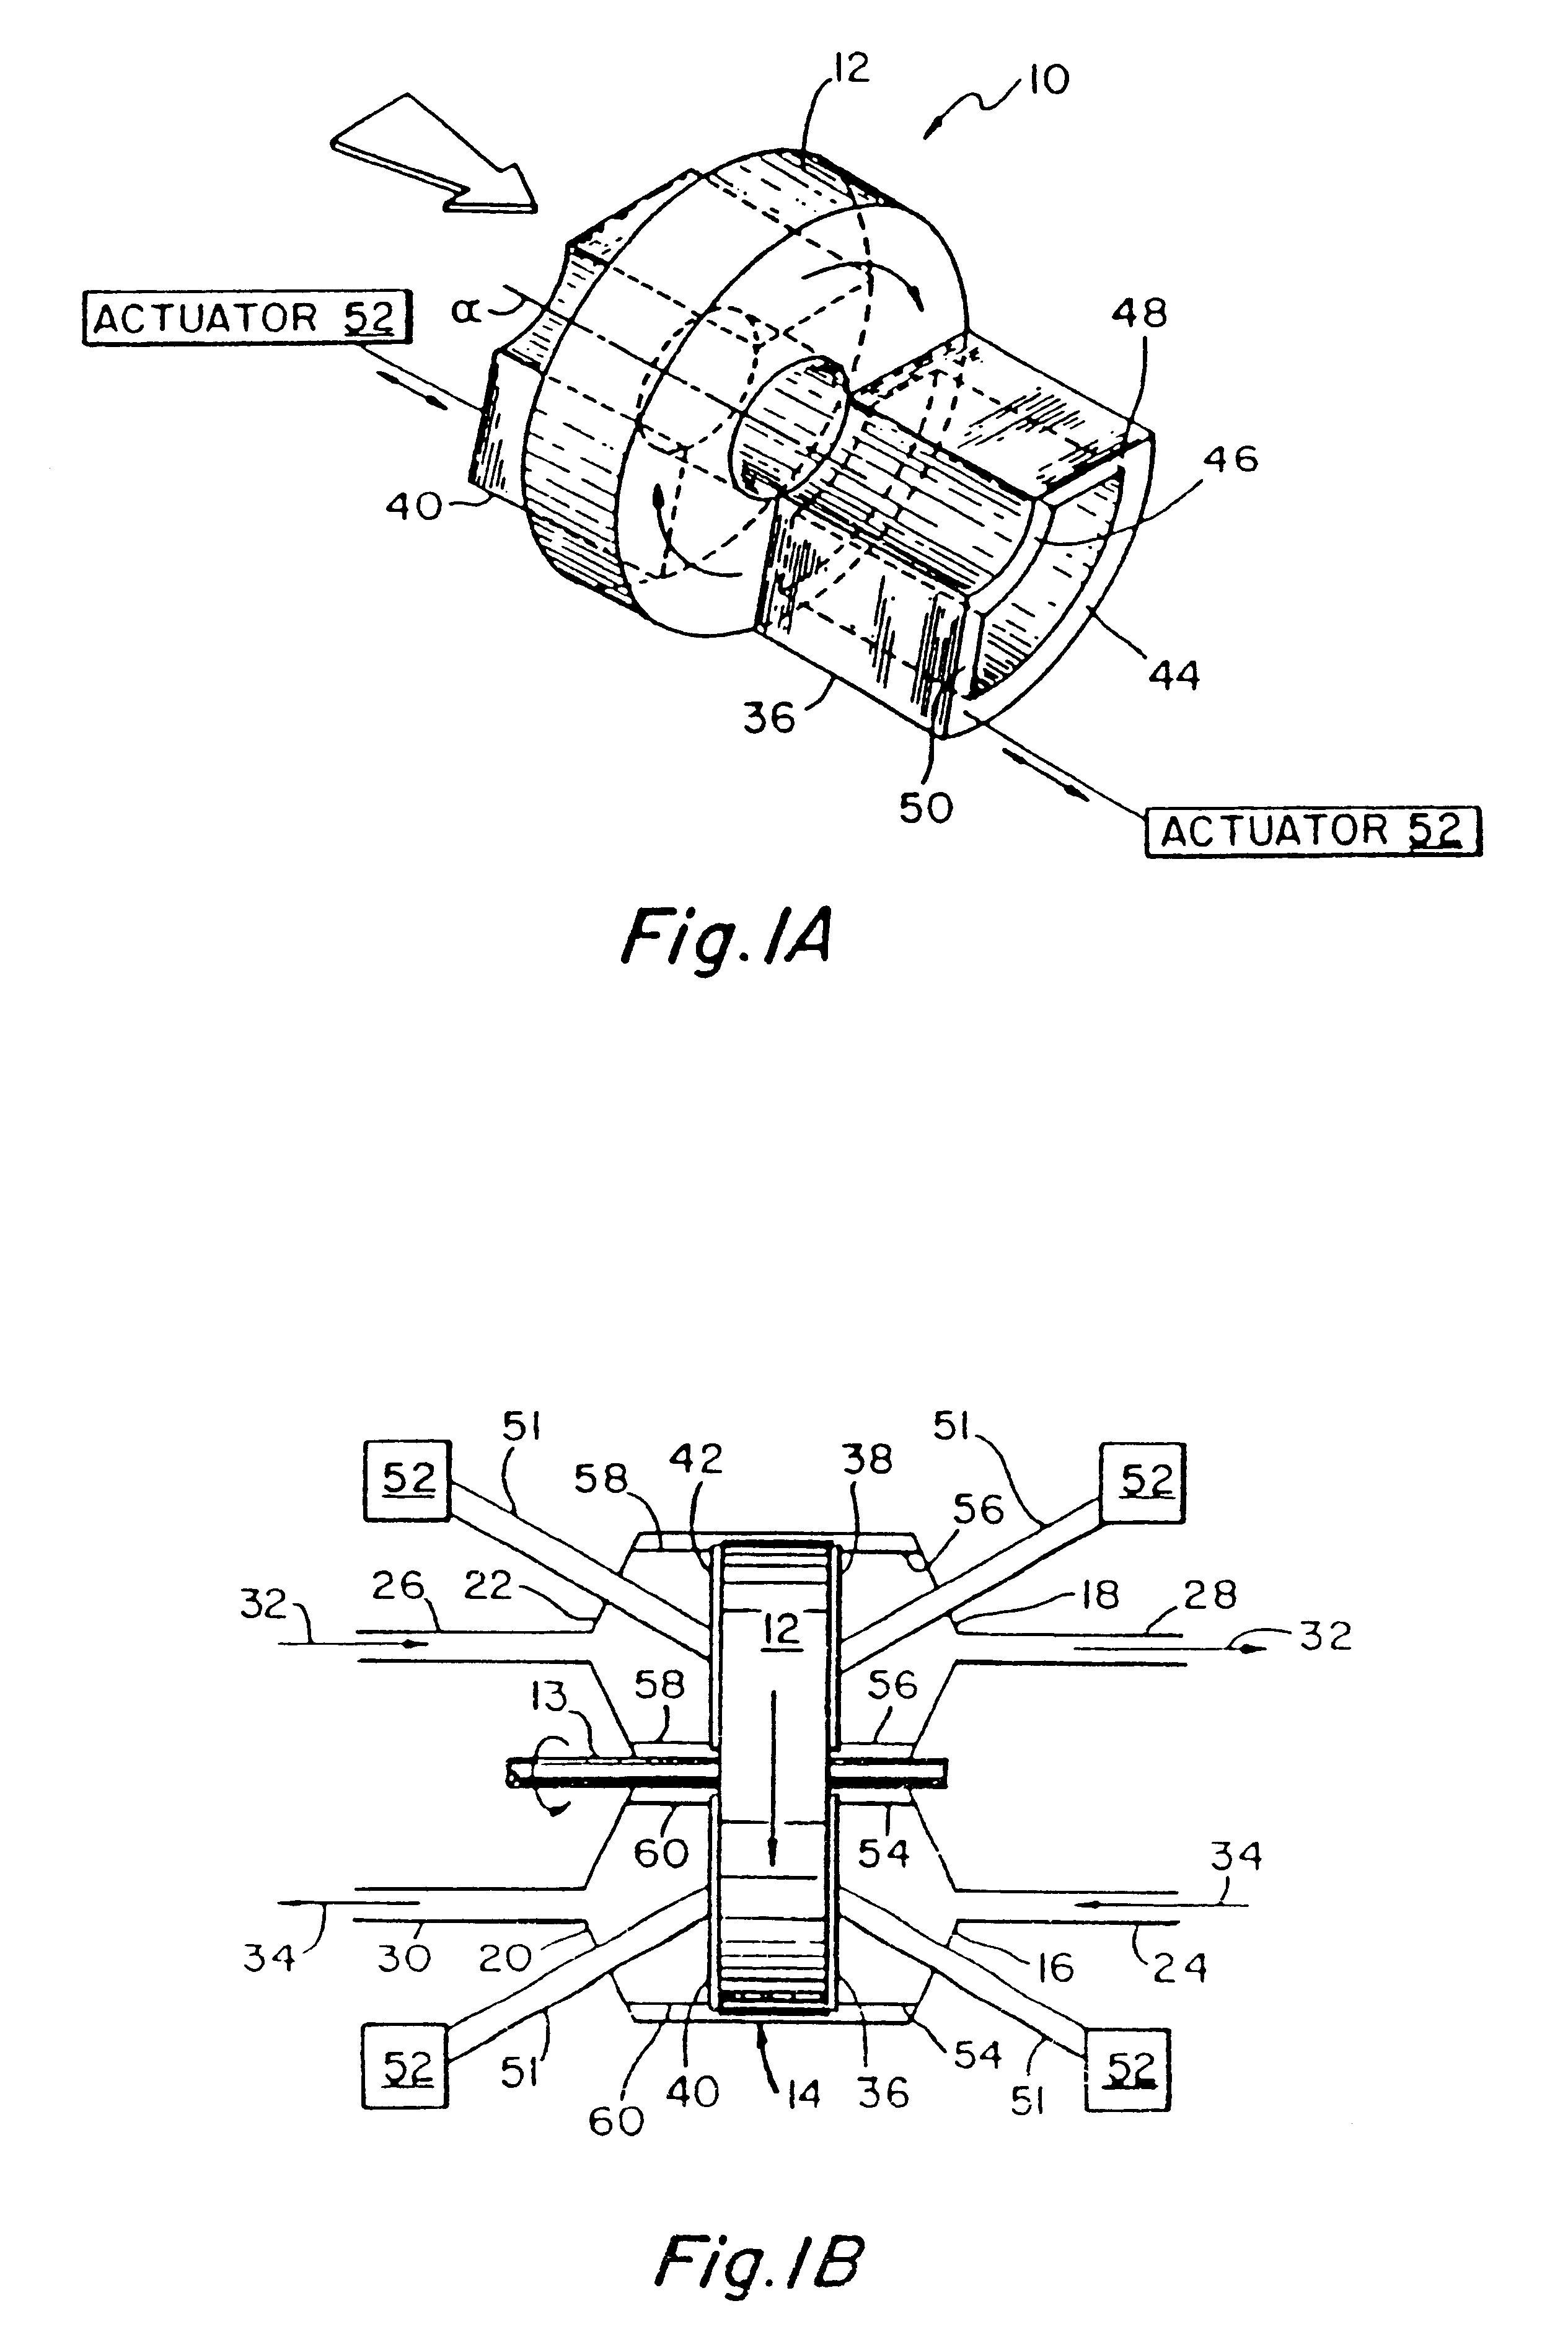 Heat exchanger containing a component capable of discontinuous movement